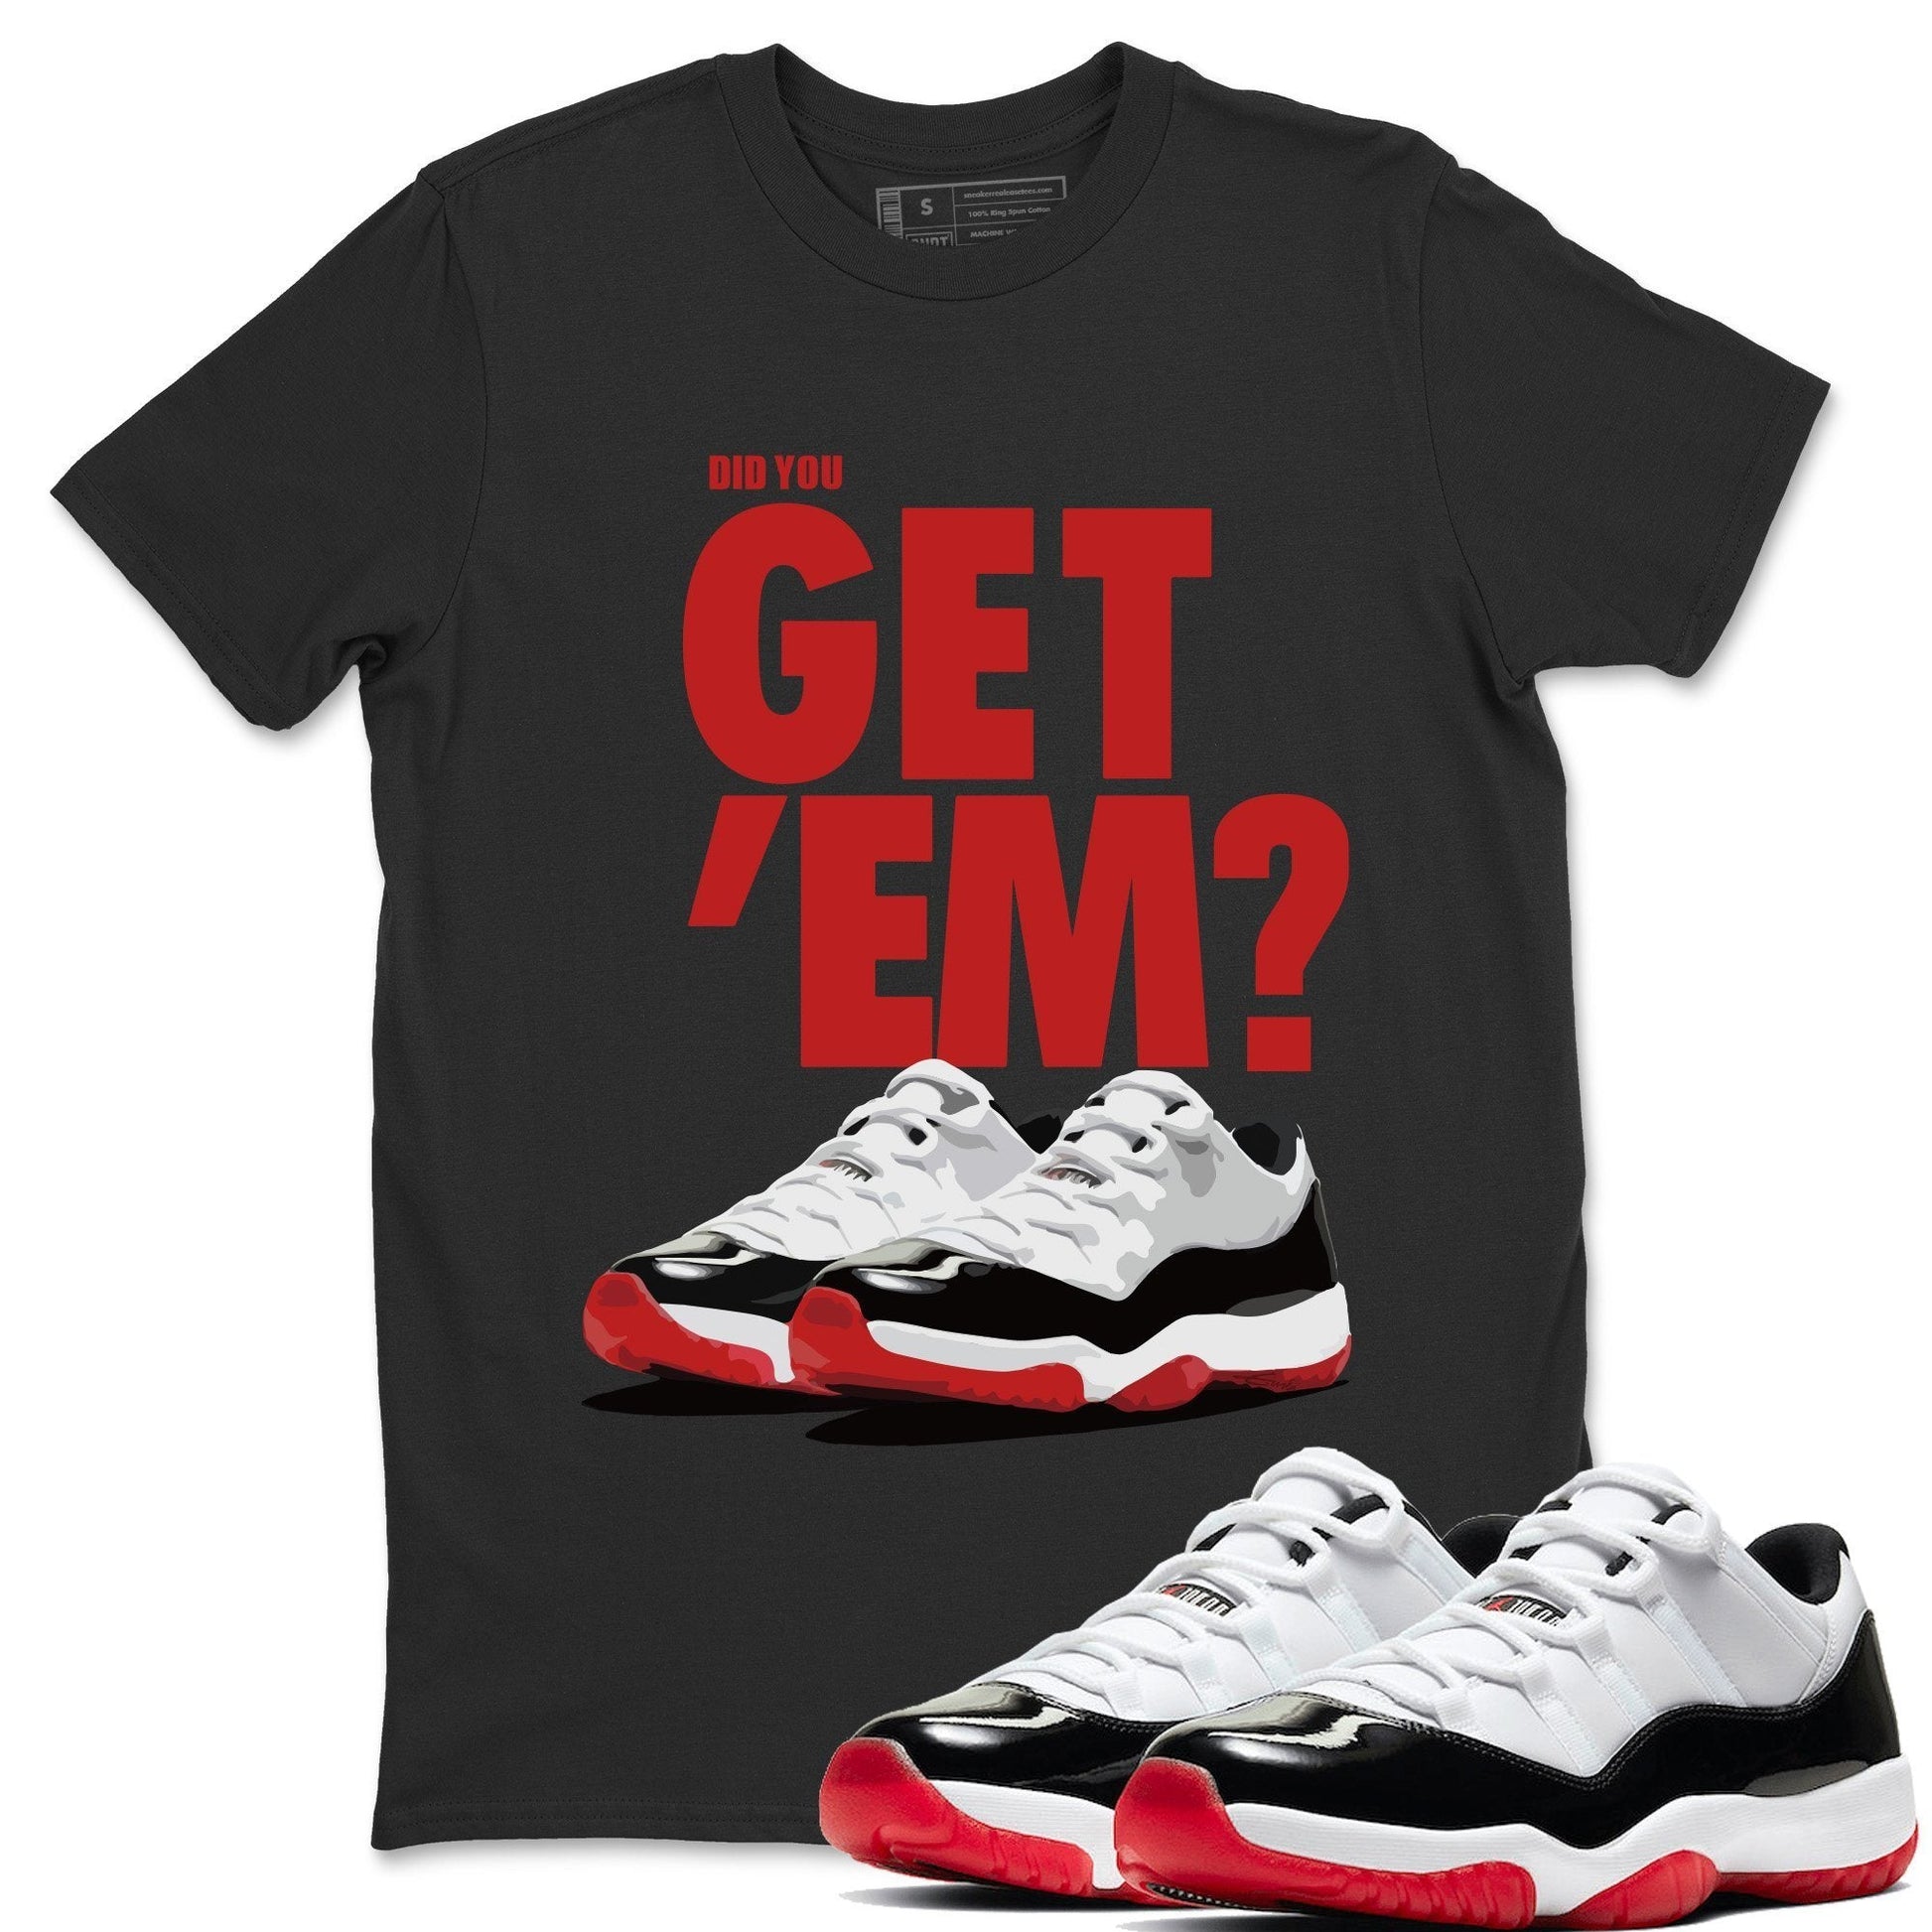 Jordan 11 Concord Bred Sneaker Match Tees Did You Get Em SNRT Sneaker Tees Jordan 11 Concord Bred SNRT Sneaker Release Tees Unisex Shirts